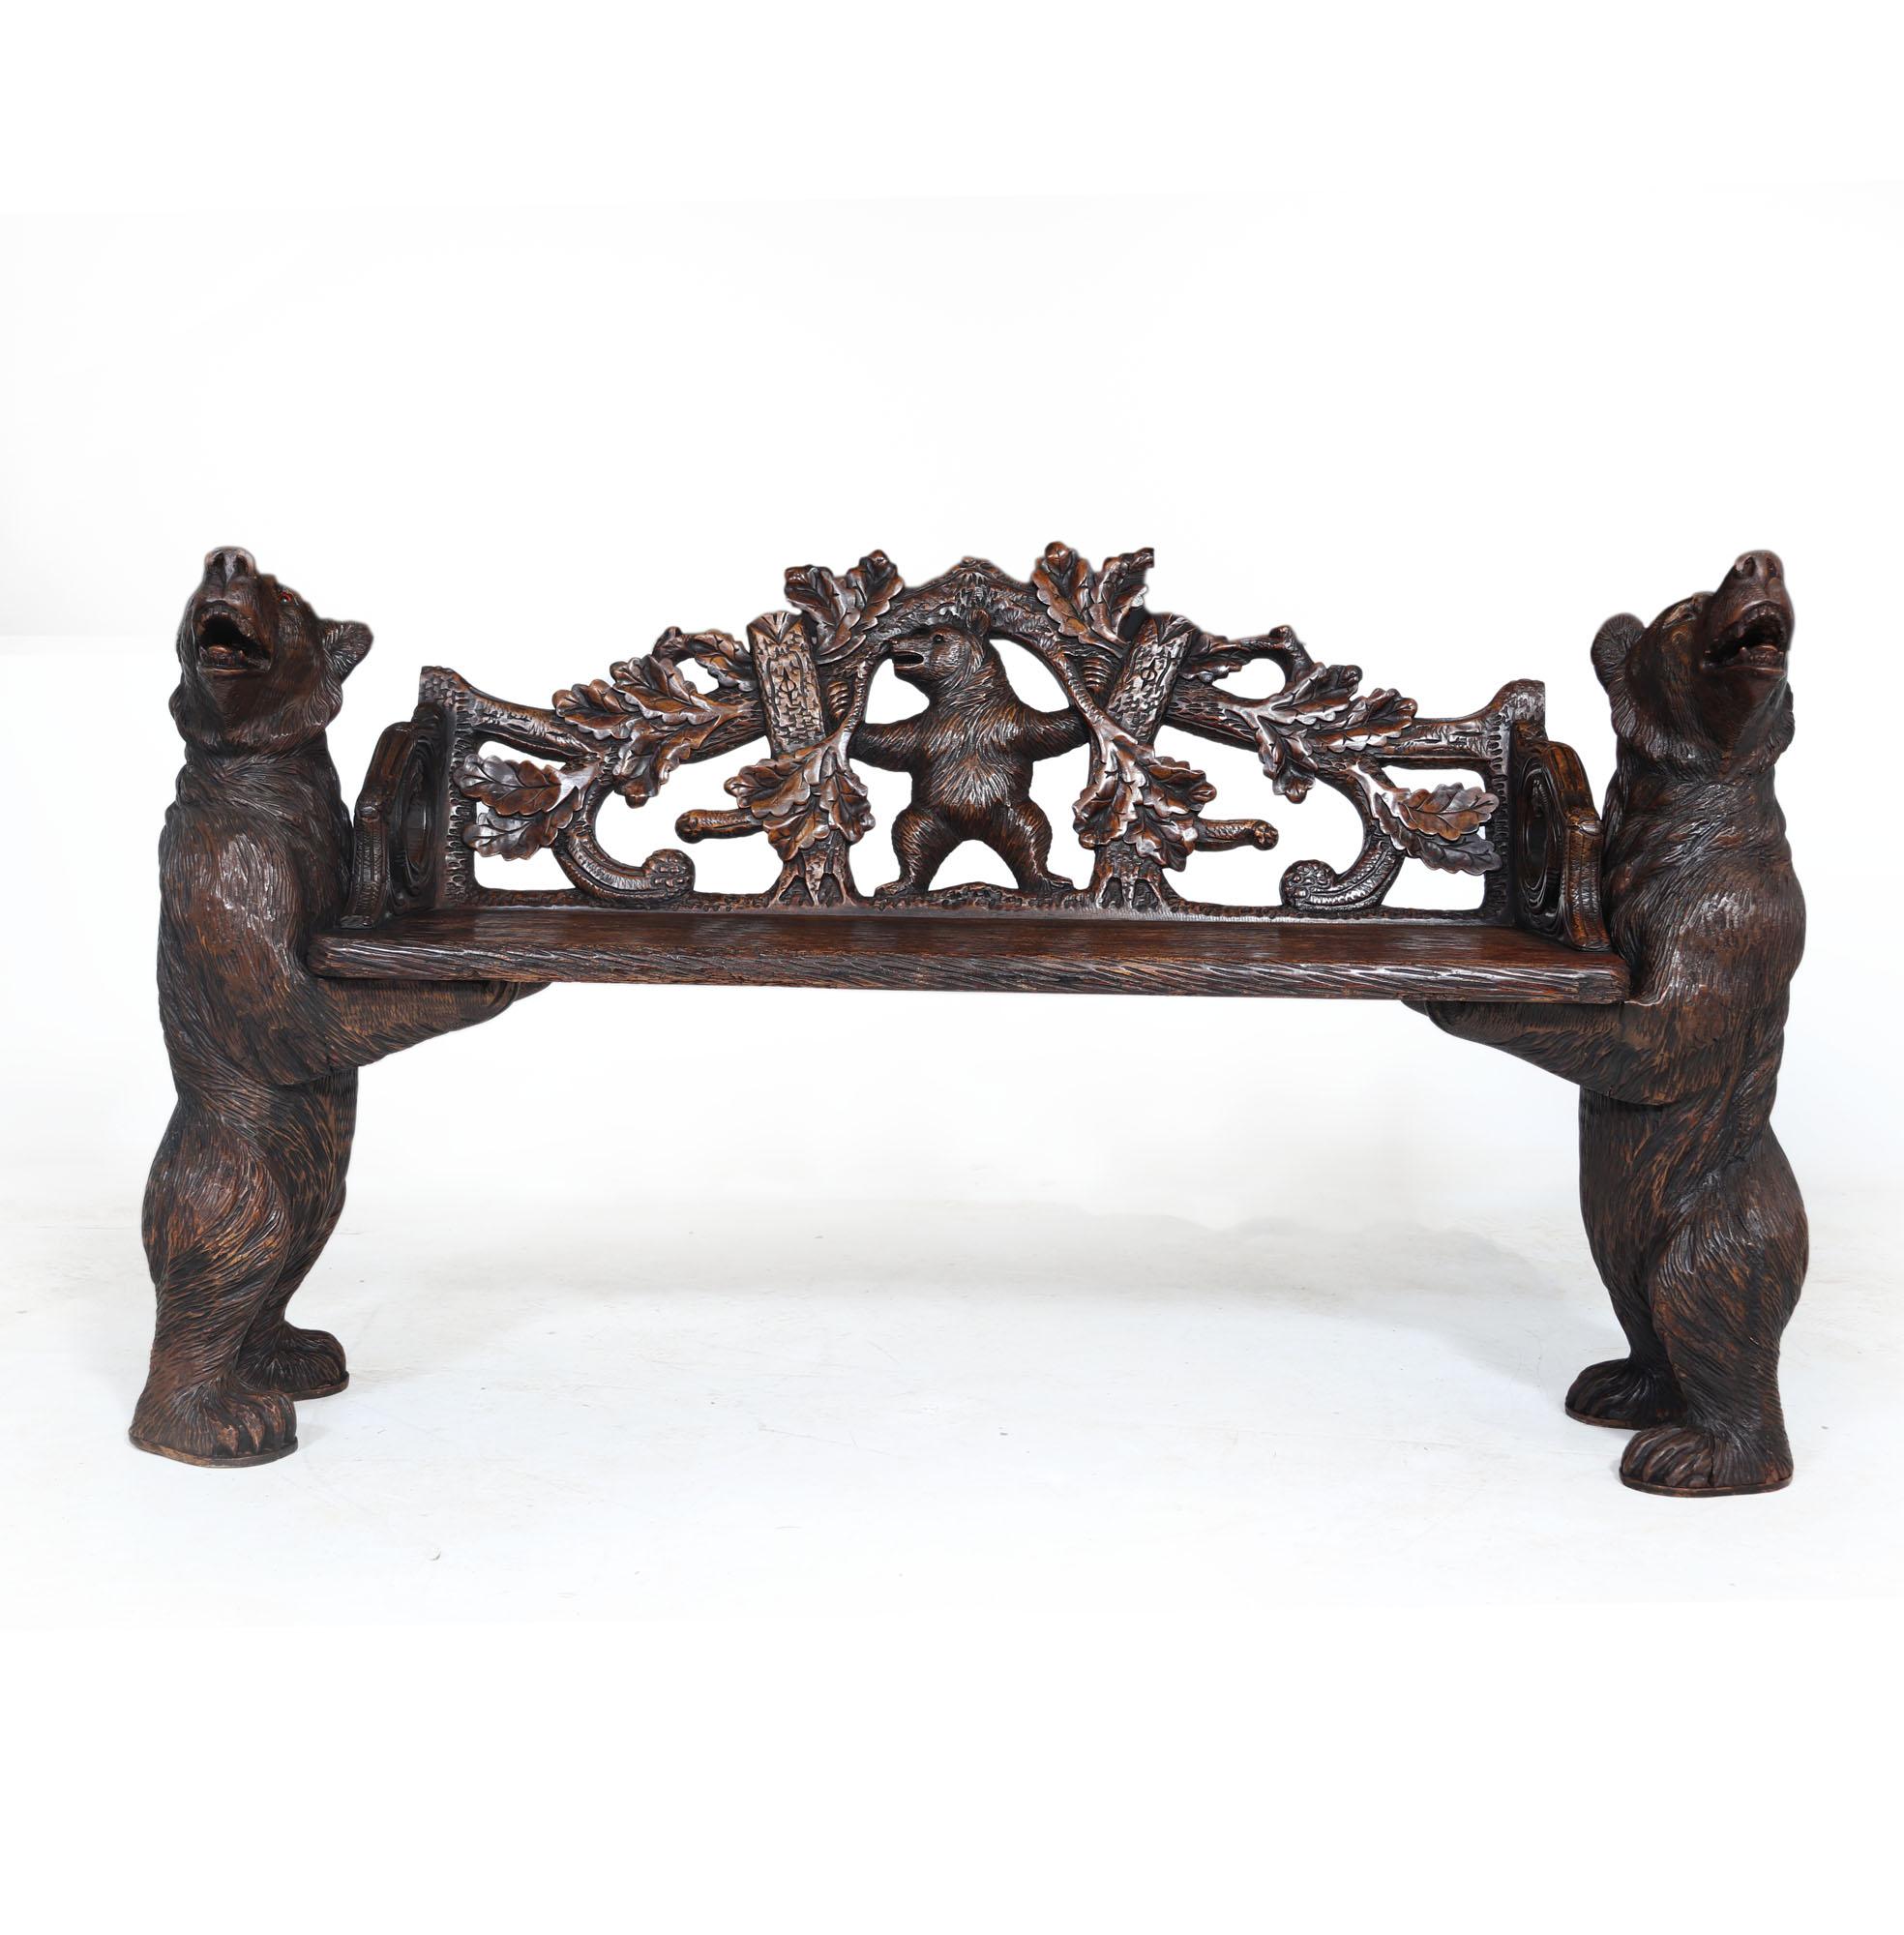 Black forest bear bench
Produced I southern Germany using wood from 'The Black Forest